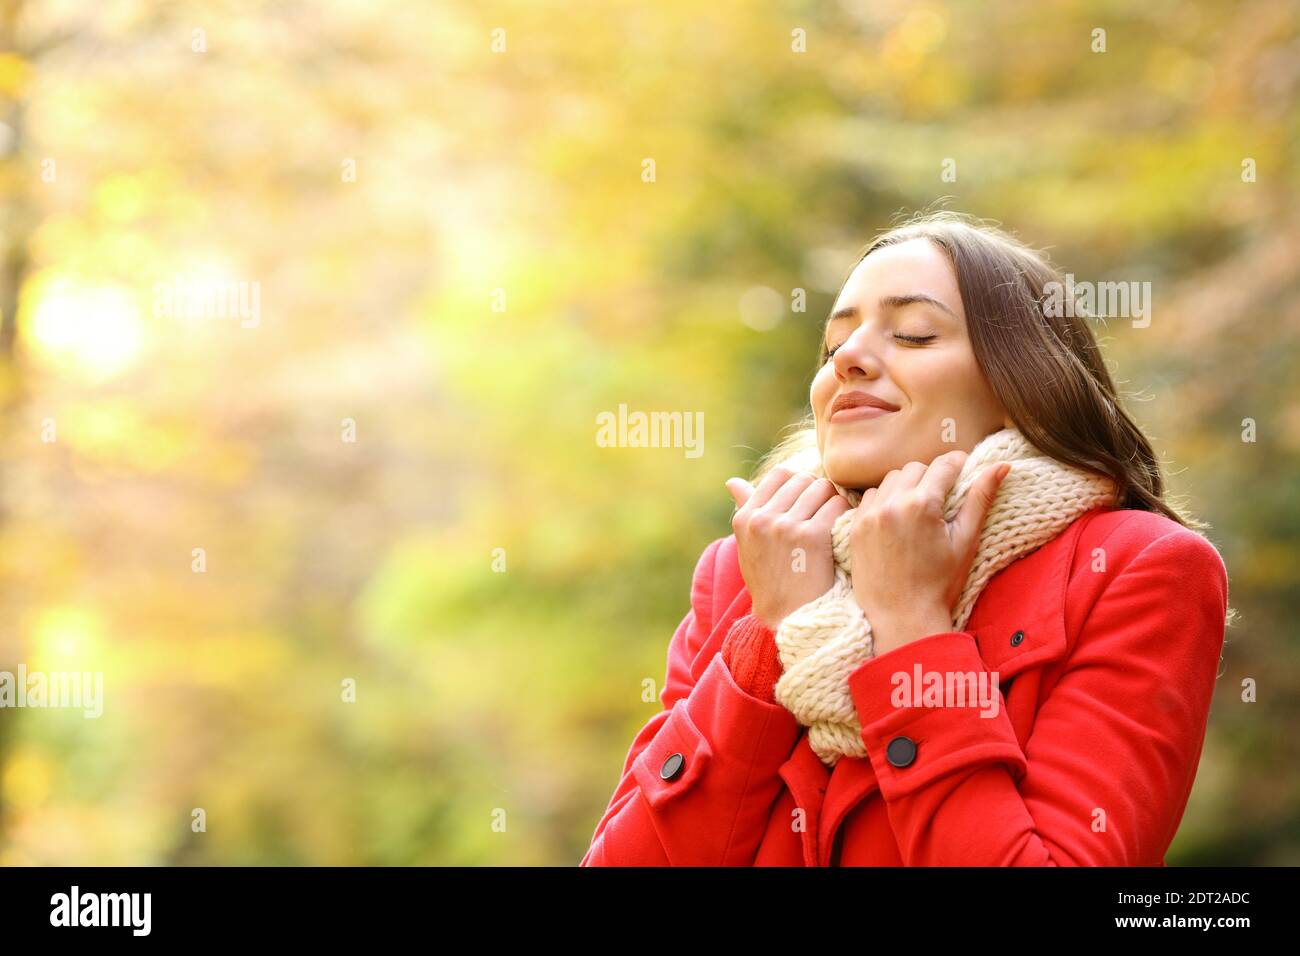 Beauty woman in red jacket heating grabbing scarf in a park in autumn Stock Photo